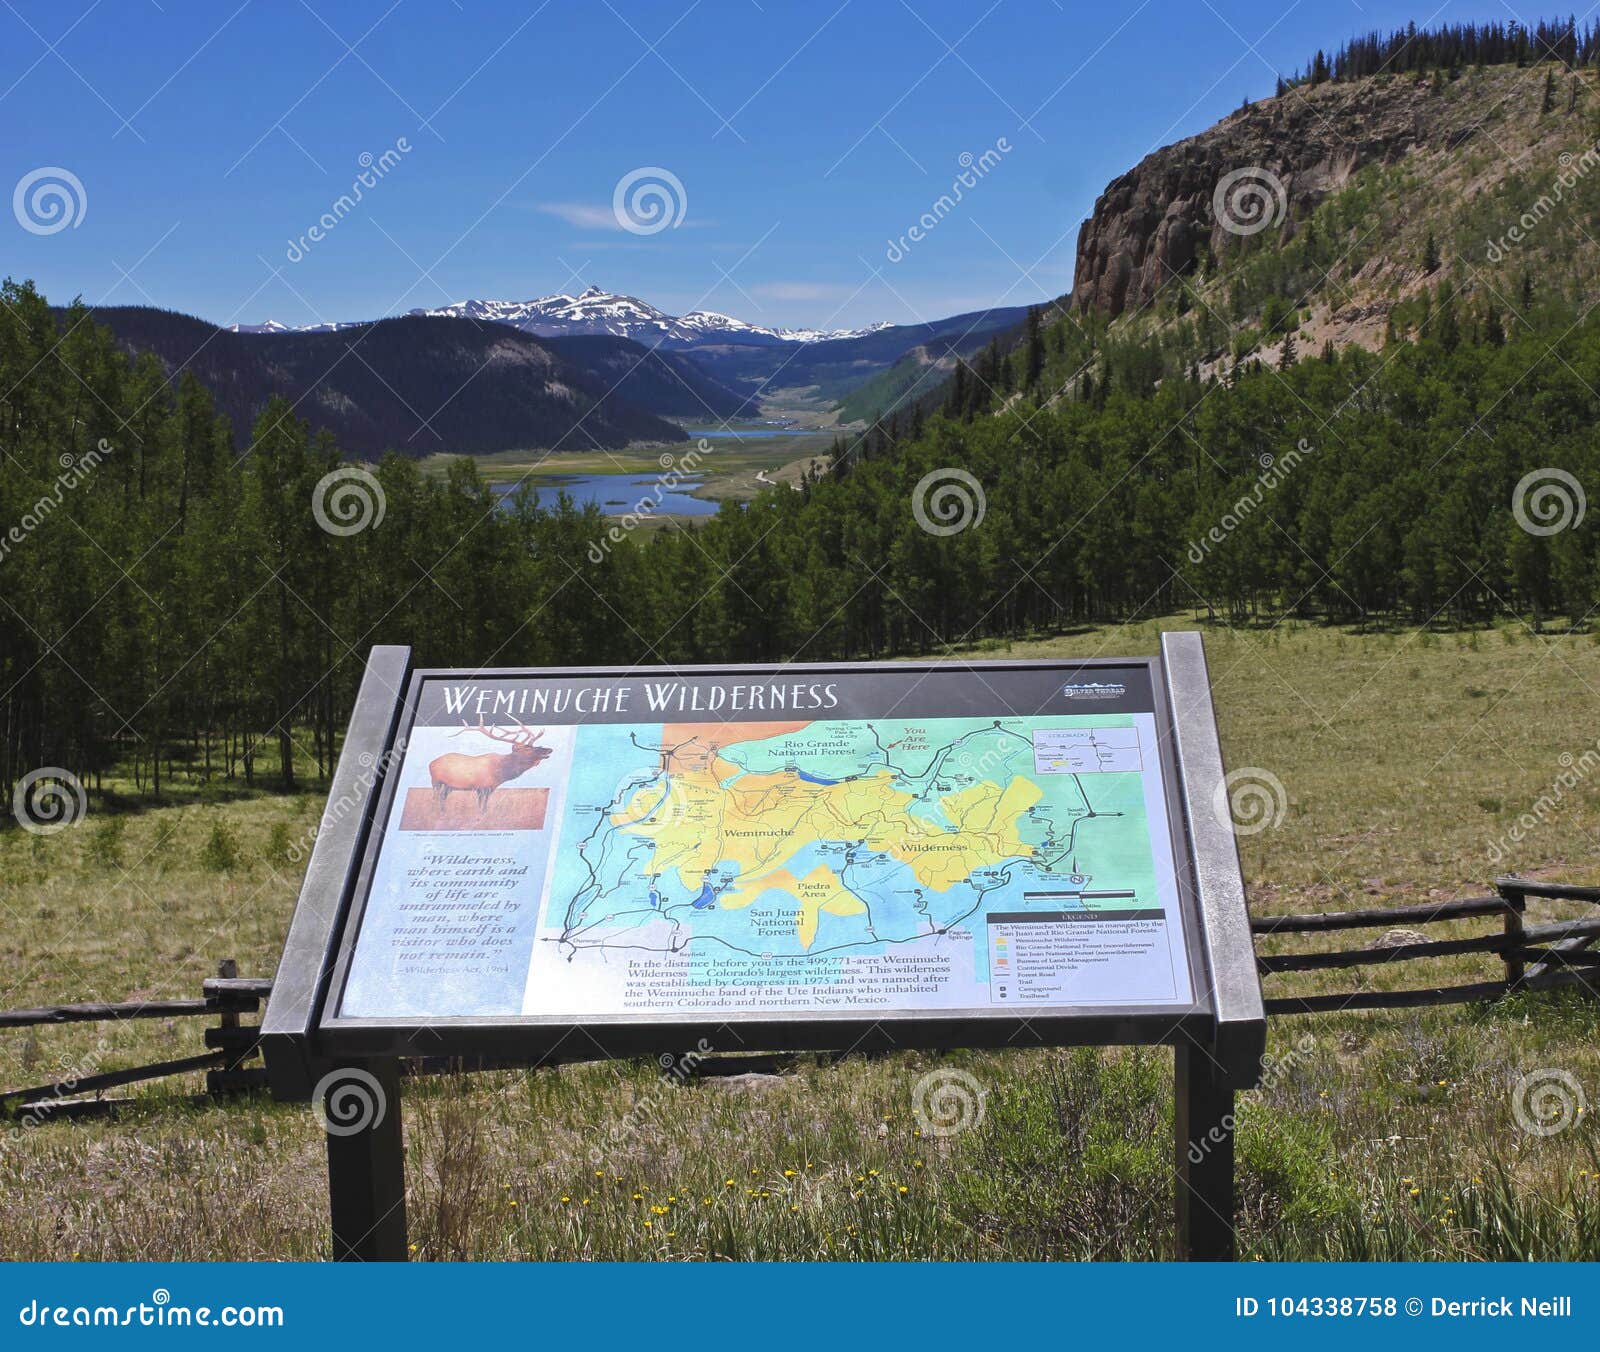 A Scenic View Of The Headwaters Of The Rio Grande River Editorial Stock Photo Image Of Pine Weminuche